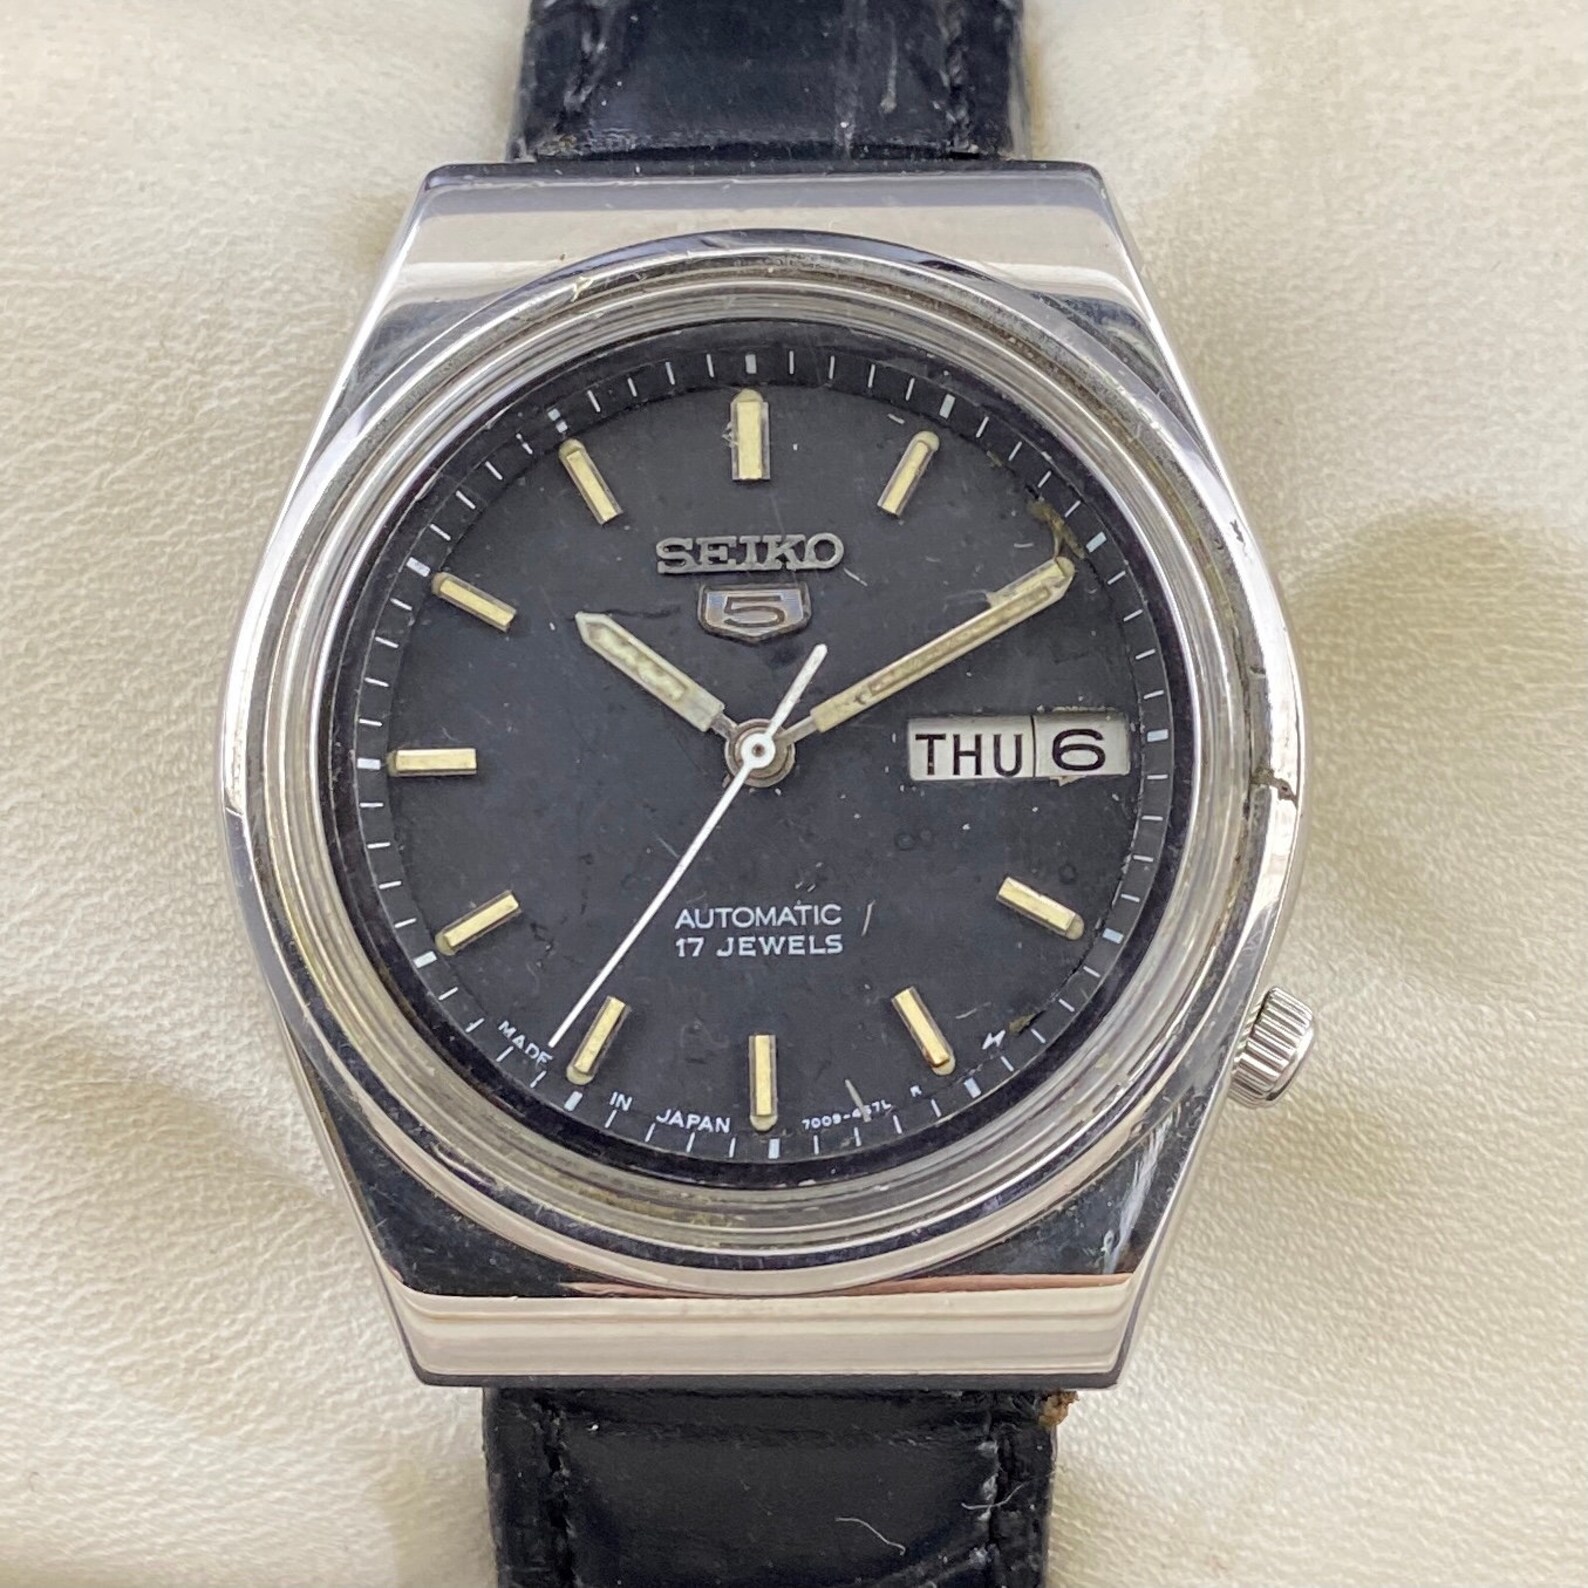 Vintage Seiko 5 Automatic 17 Jewels DAY-DATE Cal. 6309A | Etsy